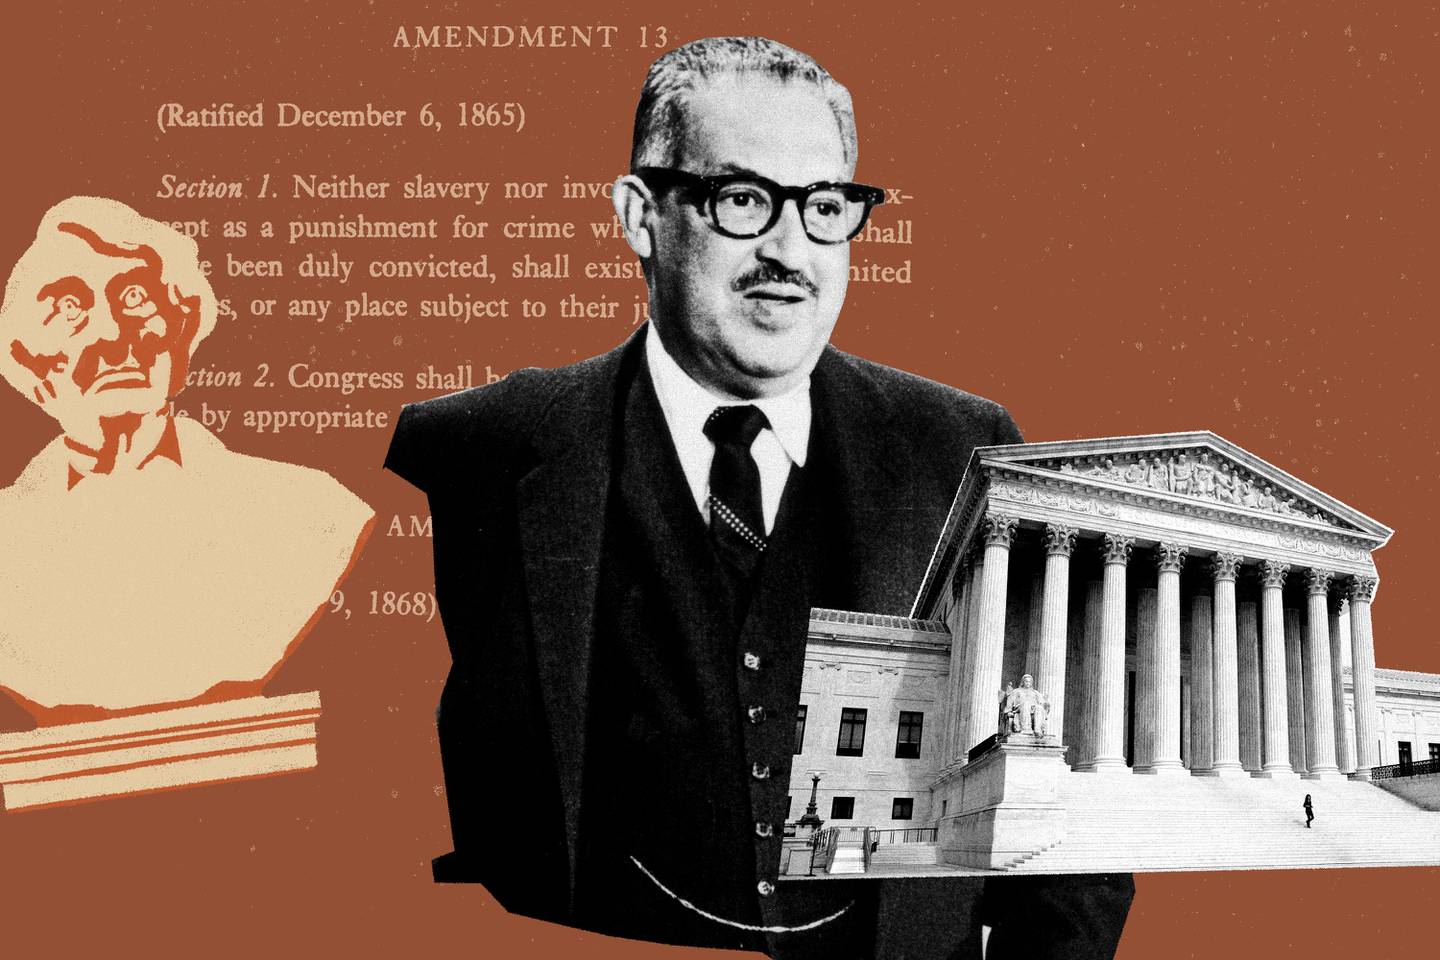 Collage of photo of Thurgood Marshall and Supreme Court building in front of drawing of Jon Taney bust and text from the 13th Amendment of the Constitution.